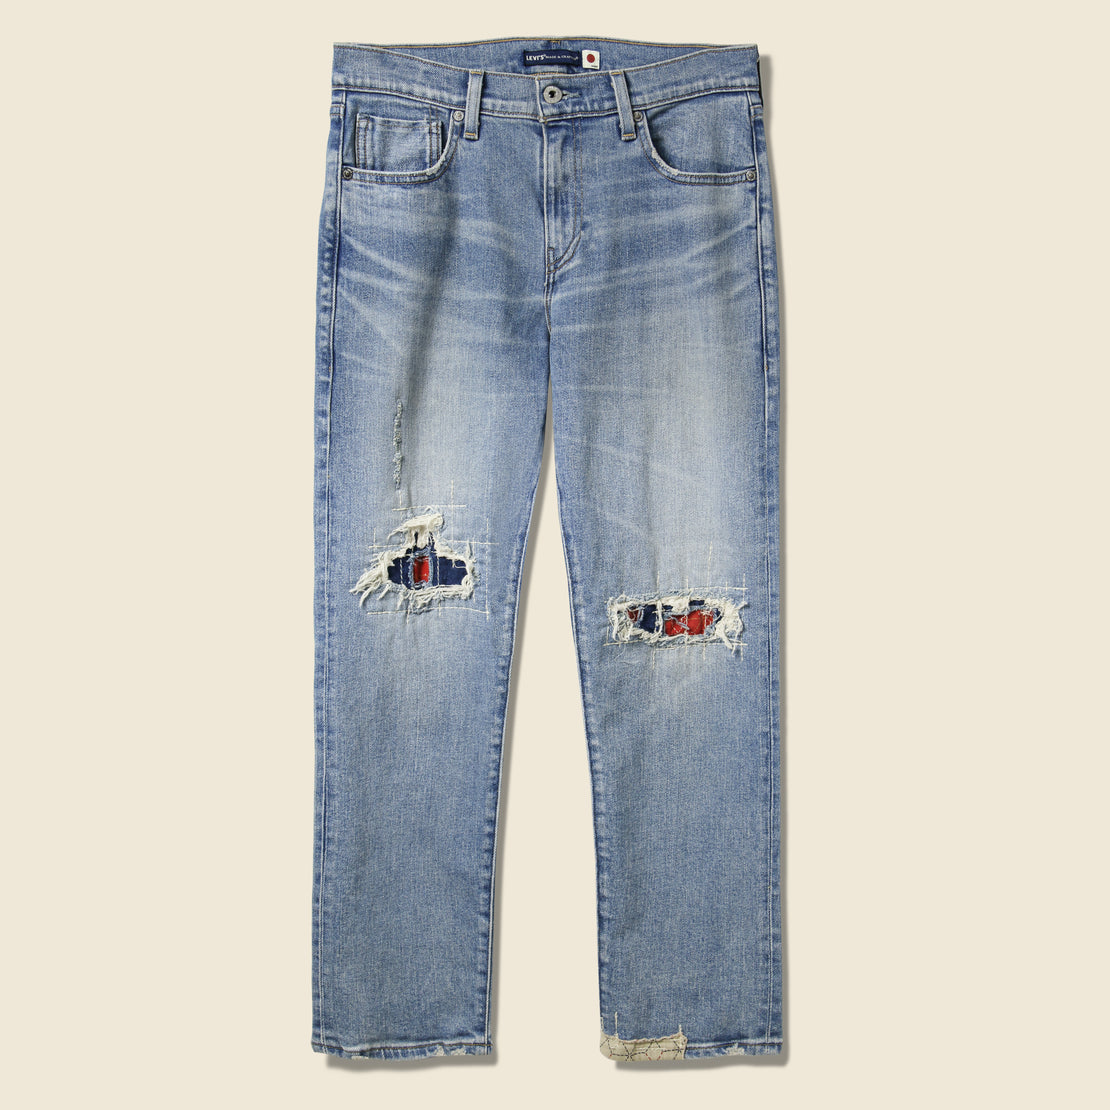 Levis Made & Crafted New Boyfriend Jean - Patched